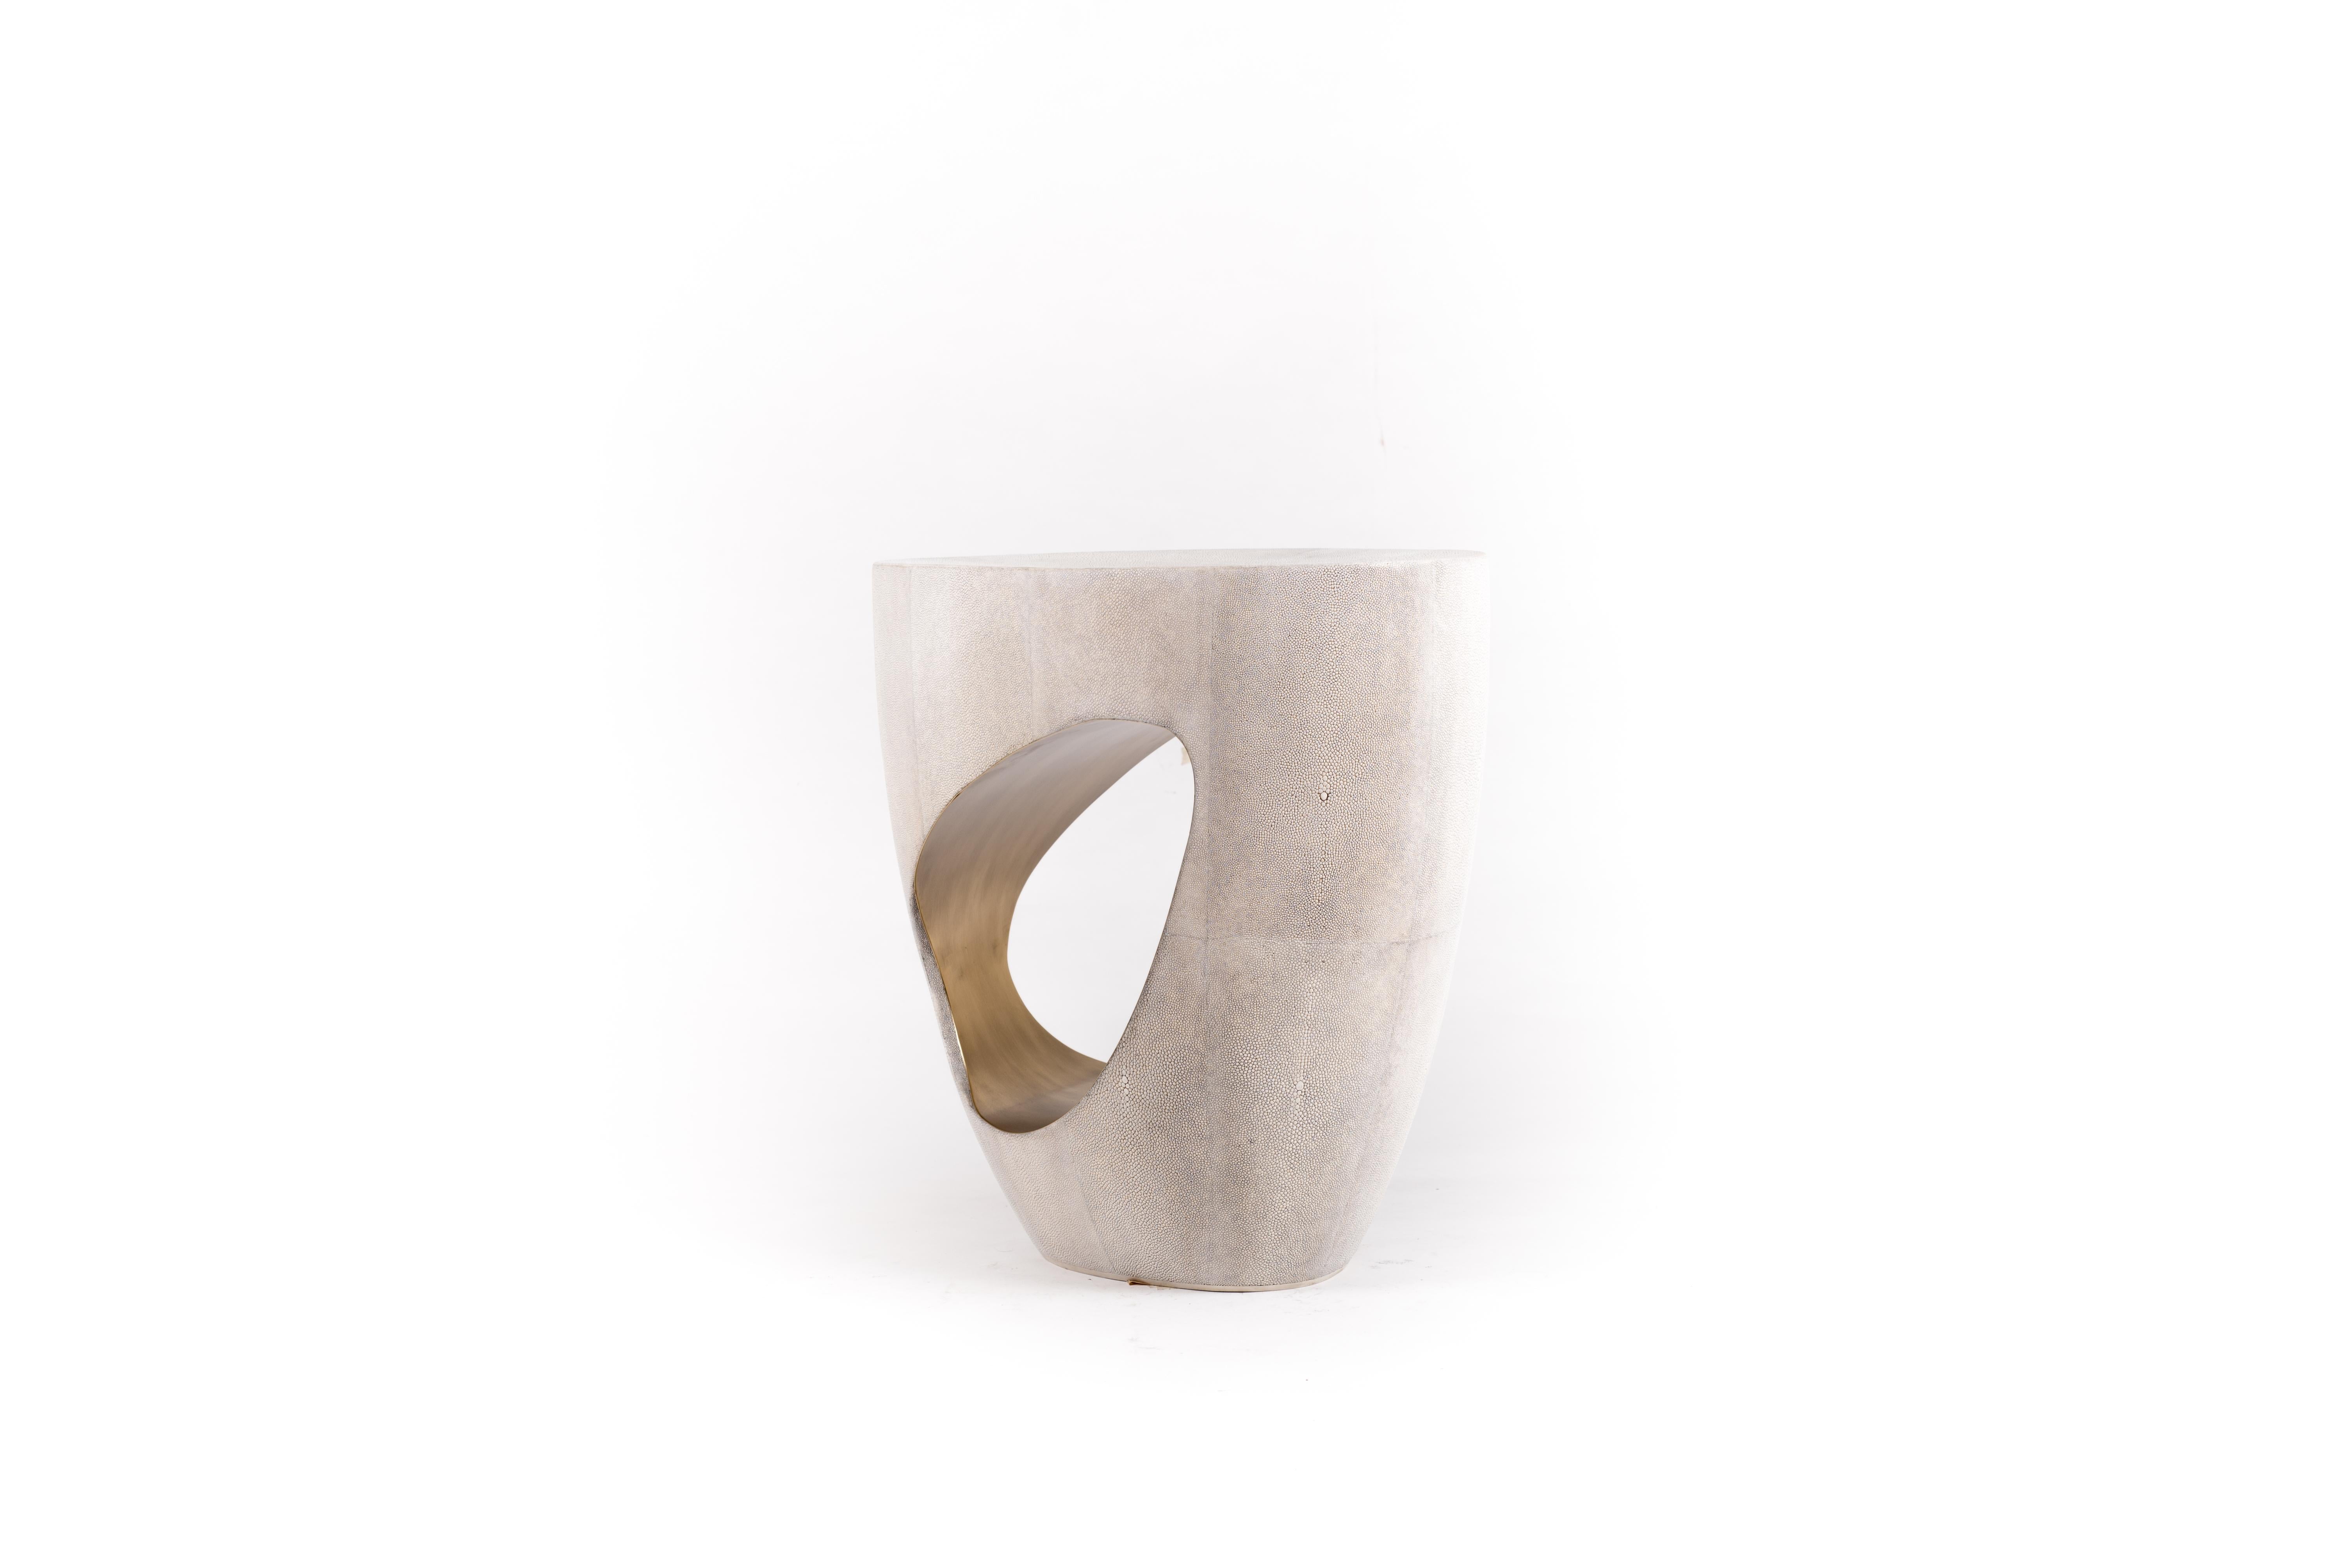 The Eclipse stool in cream shagreen by R&Y Augousti is geometric and sculptural. A jewel-like amorphous shape, this piece is completely inlaid in shagreen, while the cut cutout opening is inlaid inside with bronze-patina brass, creating a subtle and